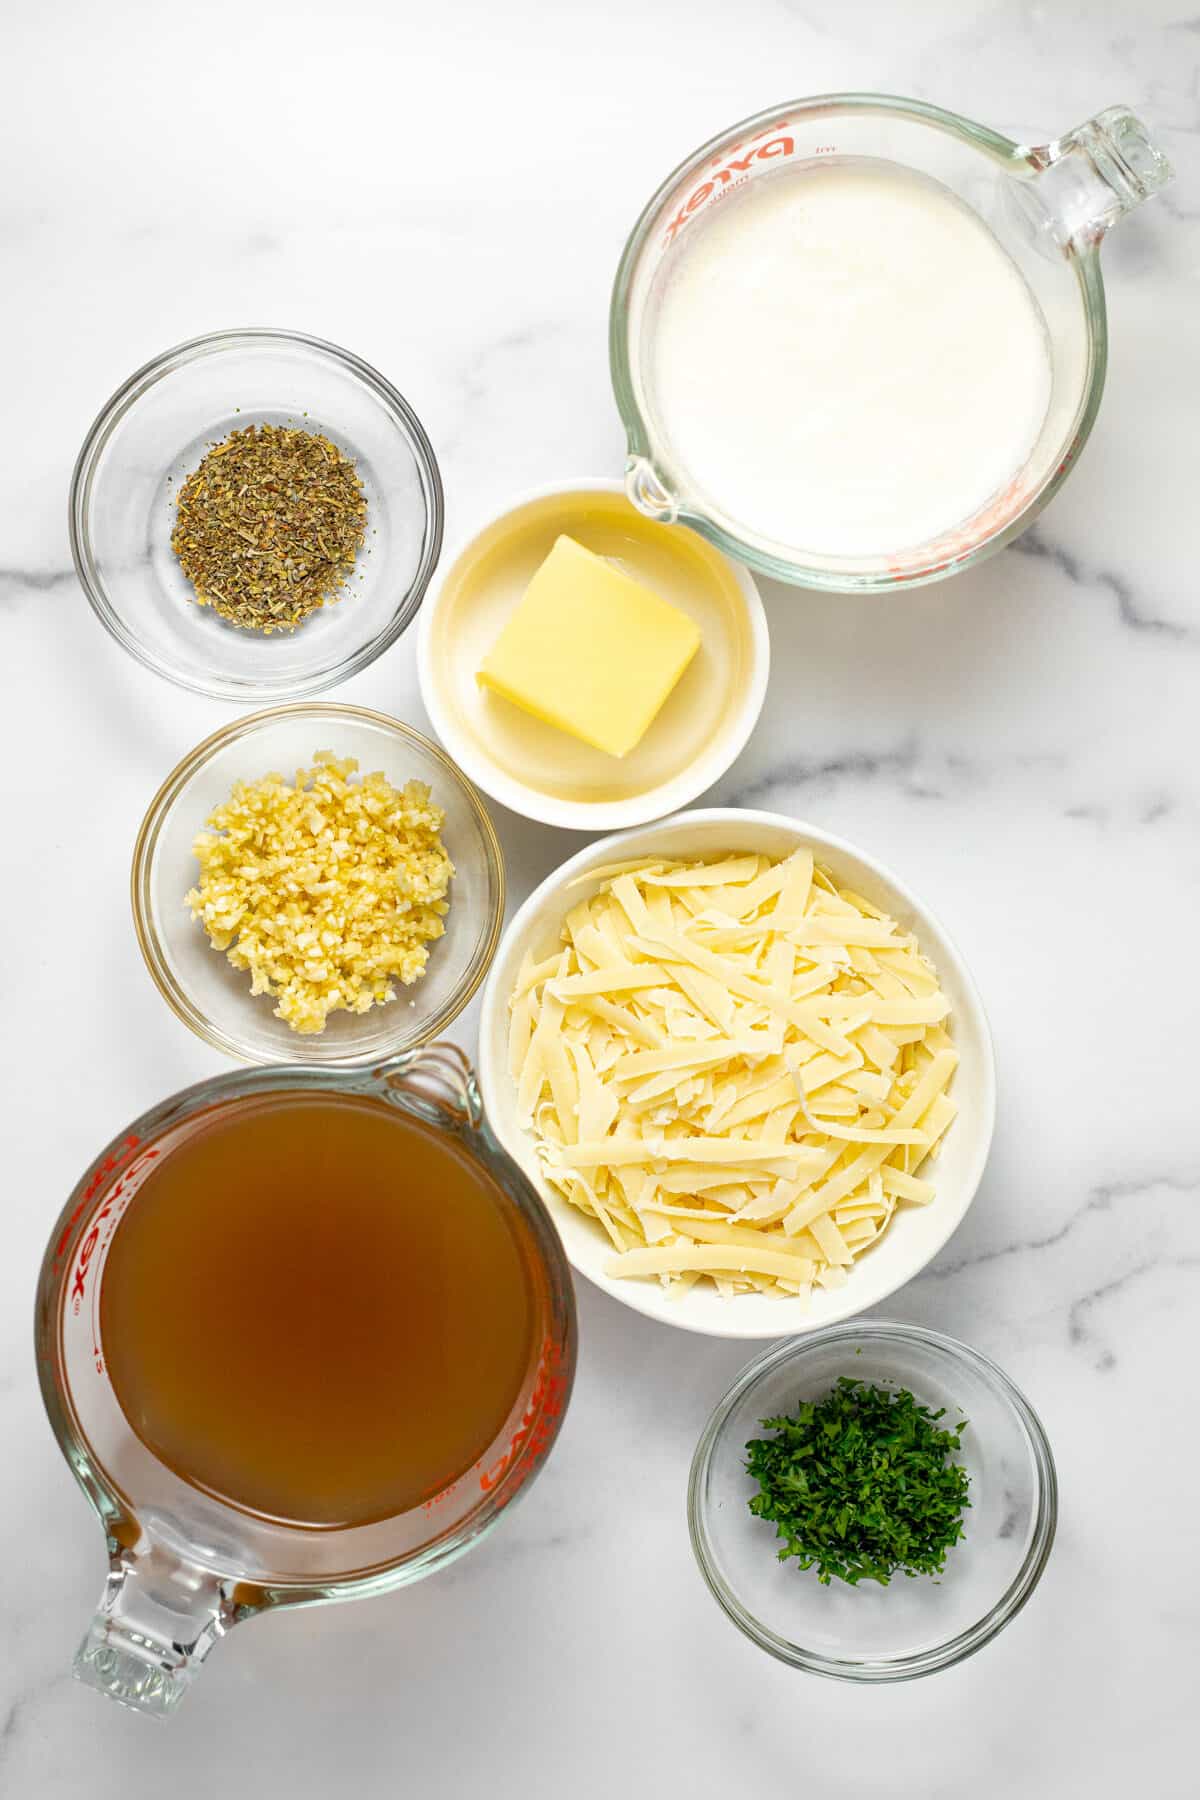 White marble counter top with bowls of ingredients to make Parmesan garlic sauce